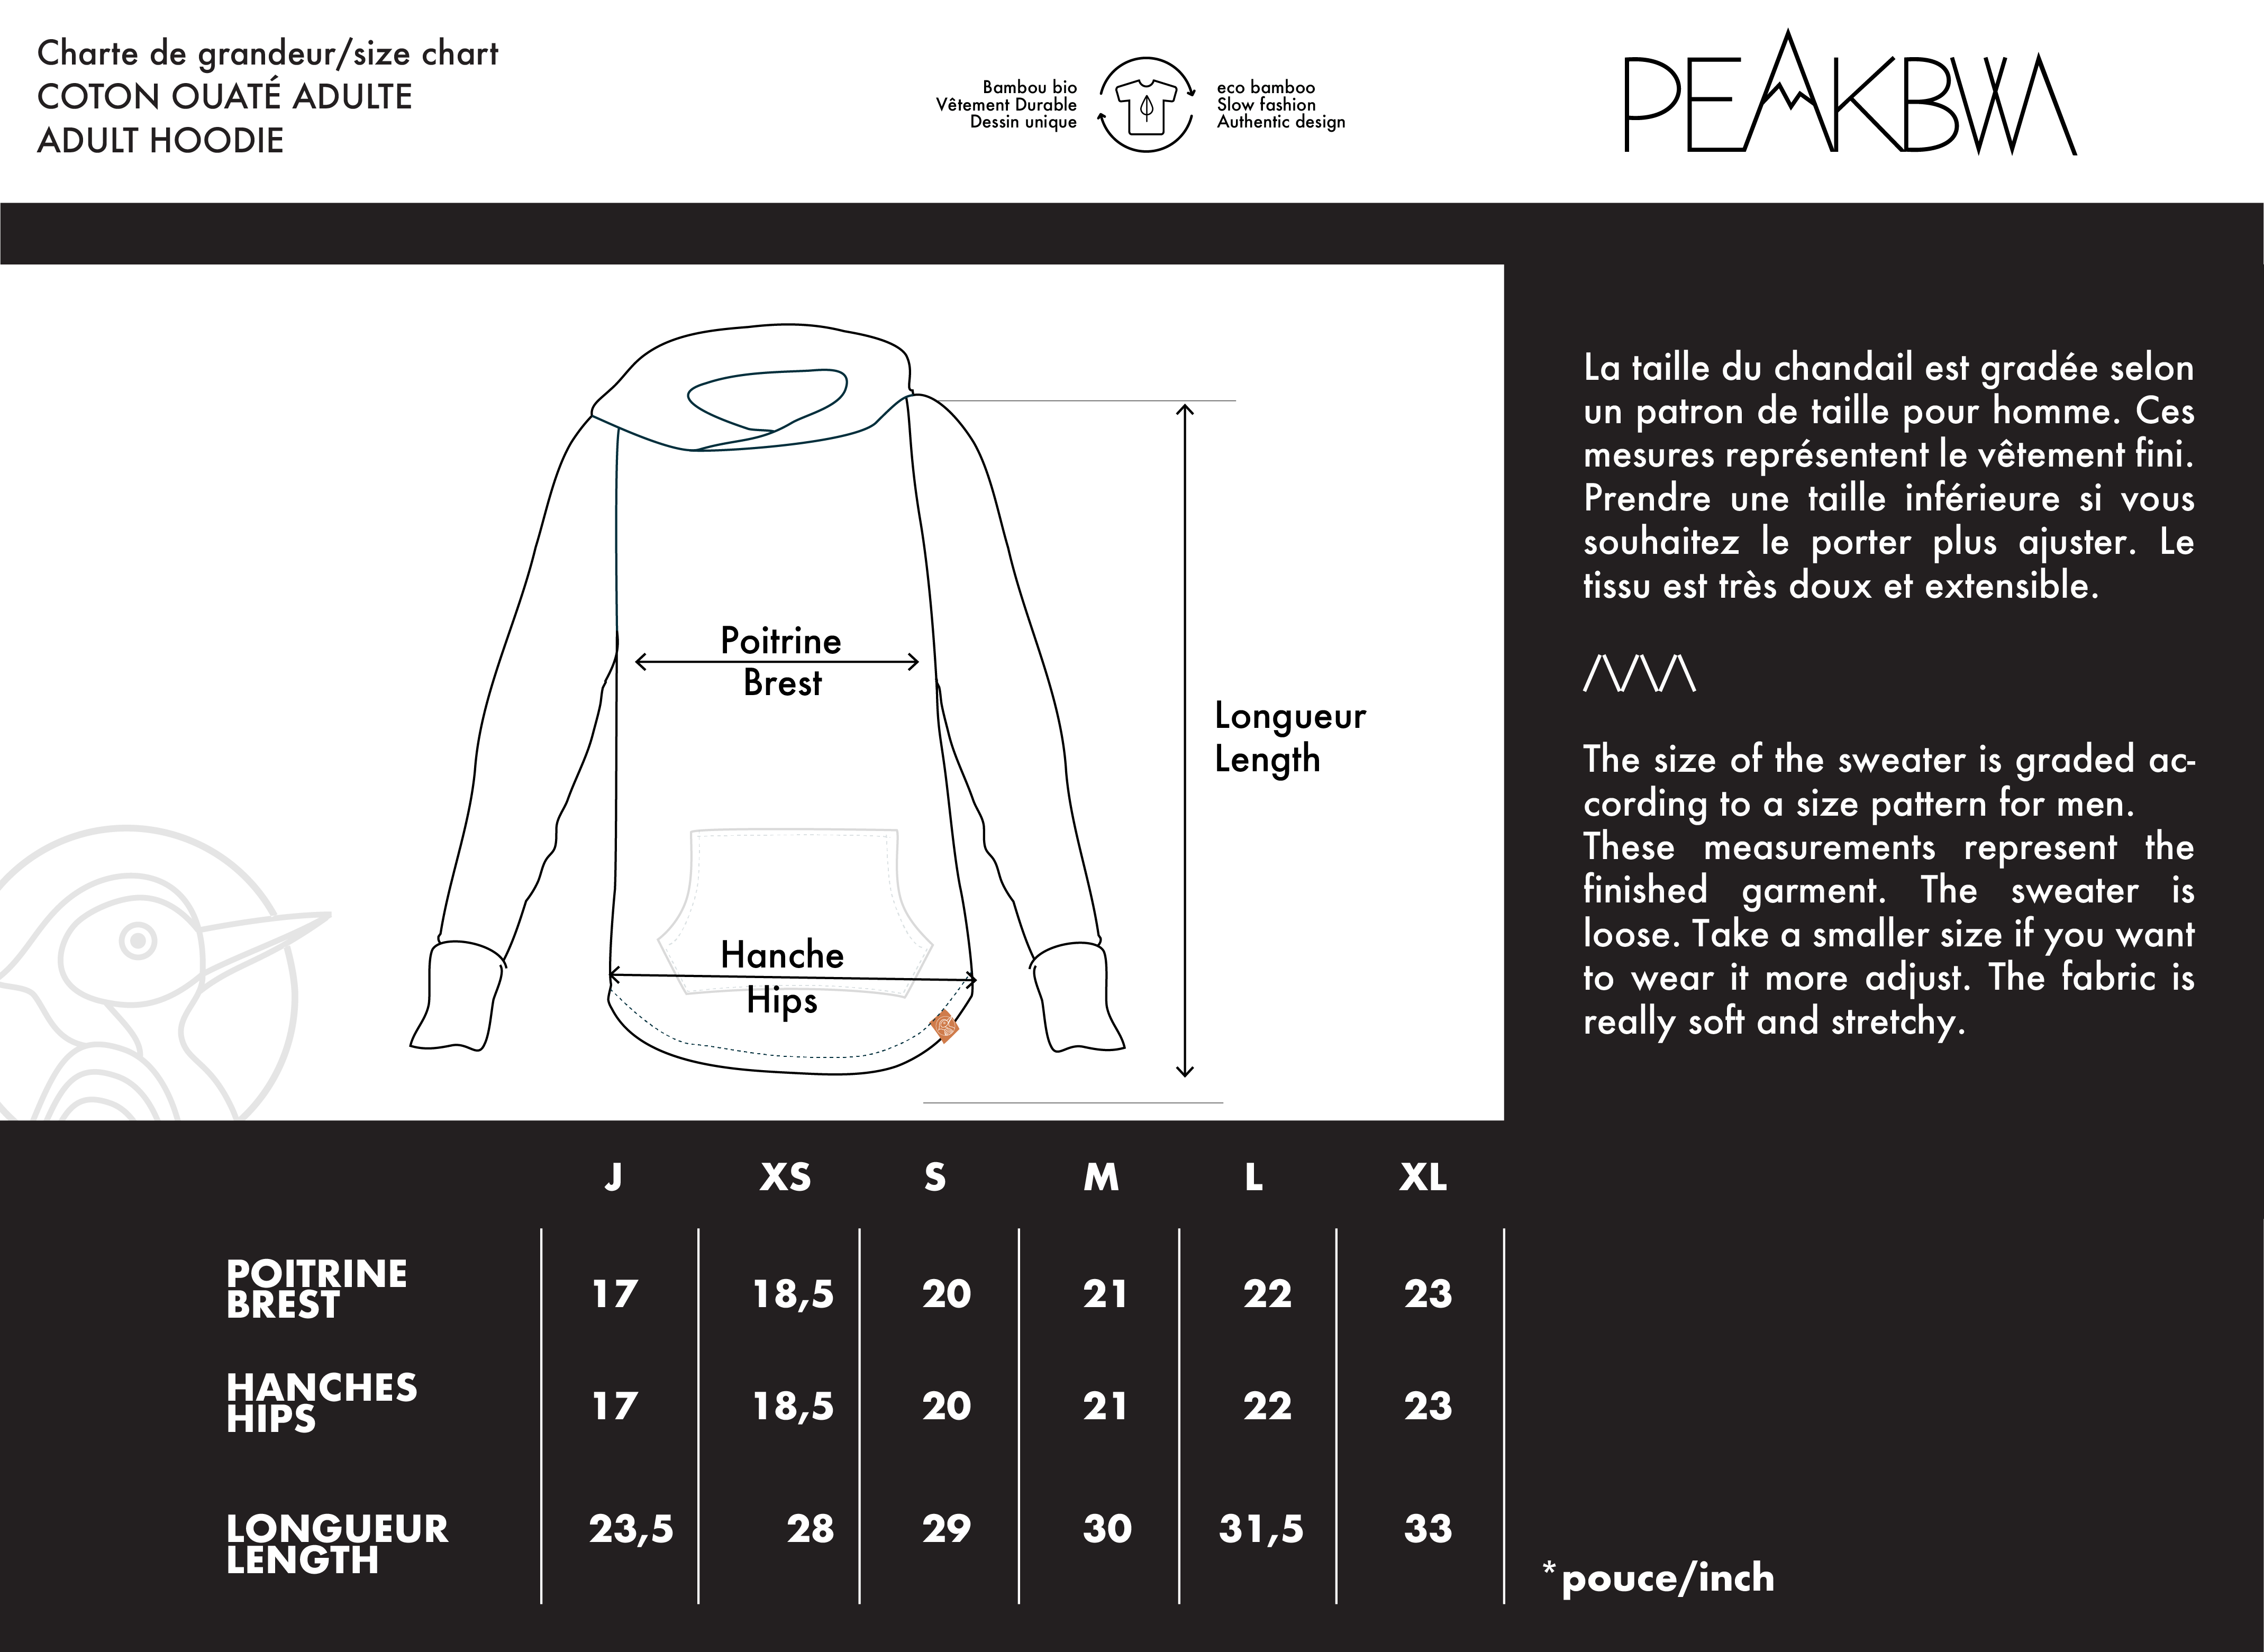 Hoodies for adults size chart